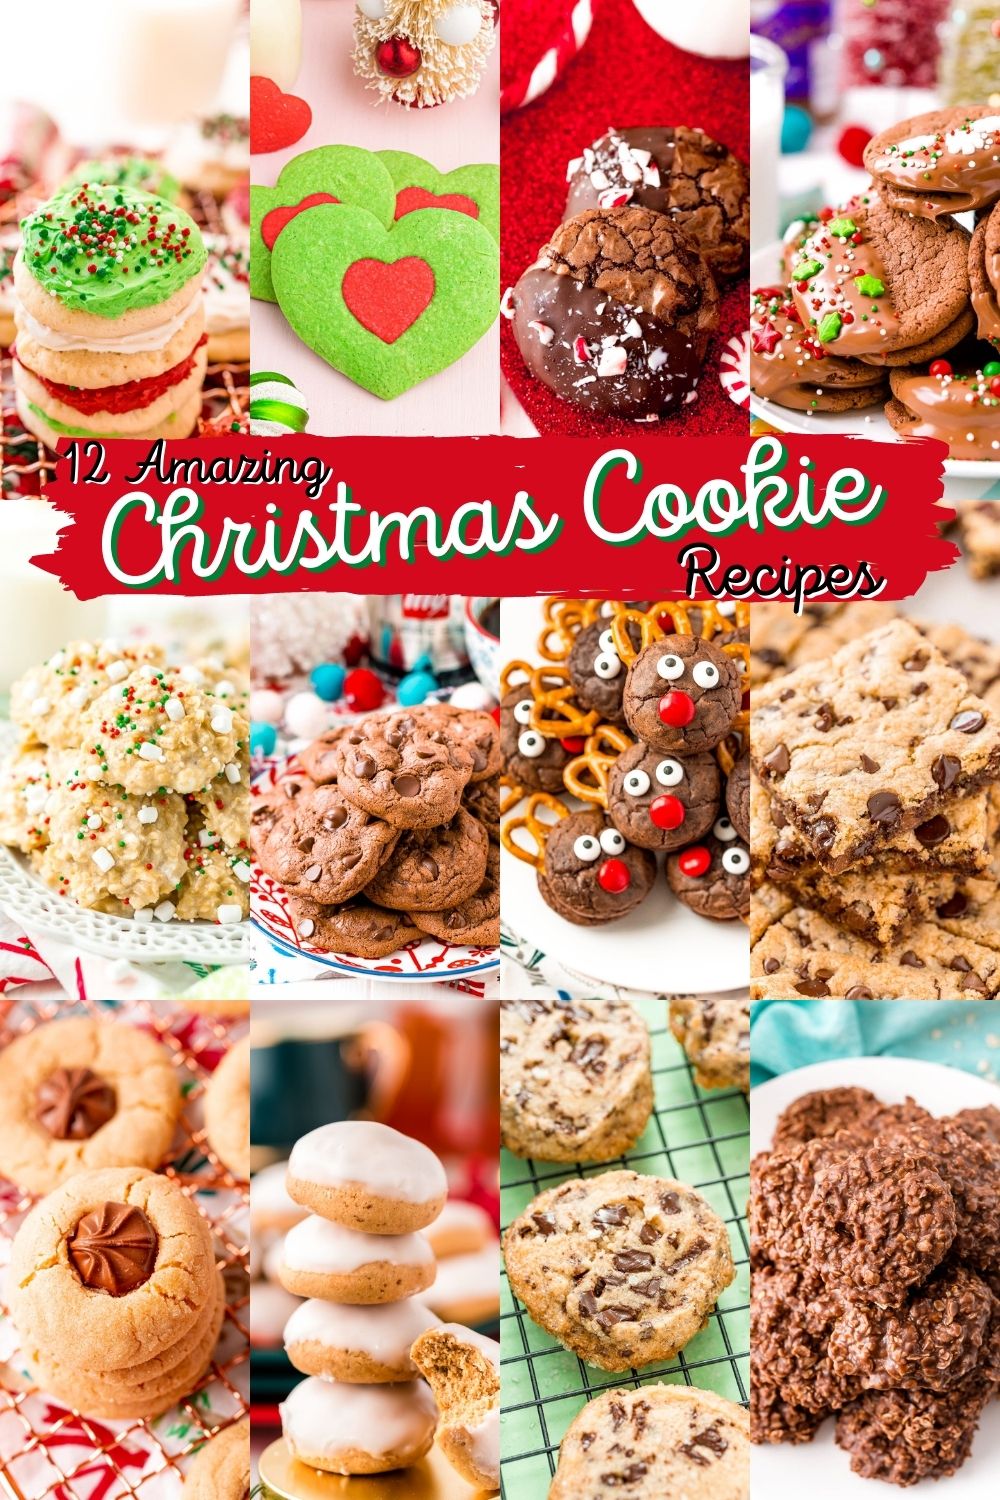 These 12 Christmas Cookies are the perfect way to add fun and flavor to your holiday cookie swaps and gatherings! via @sugarandsoulco